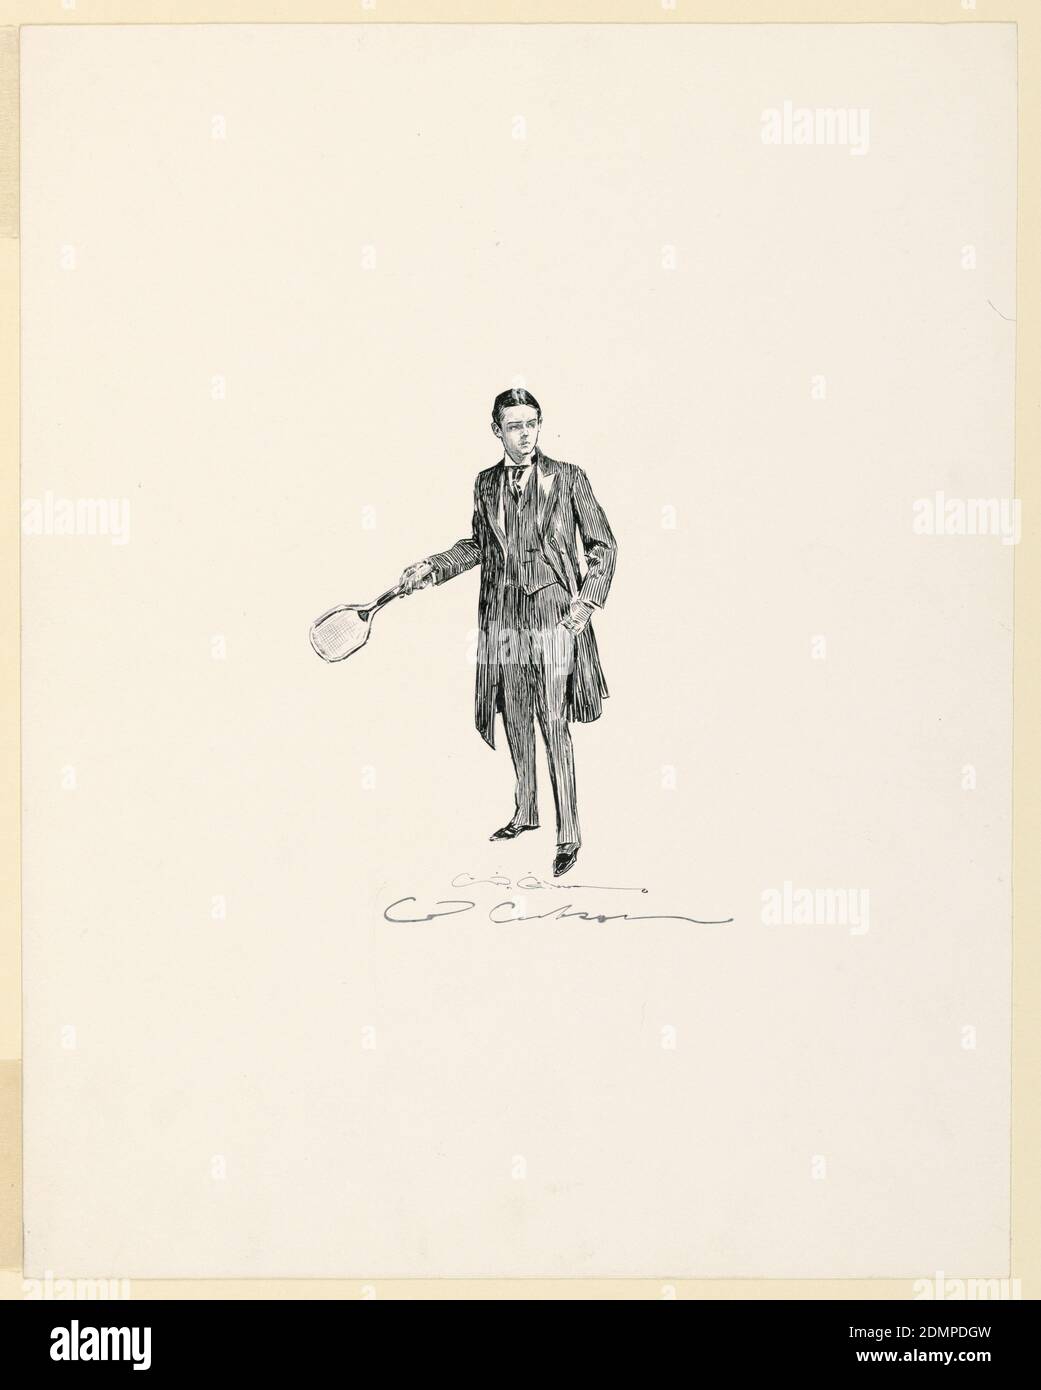 Play, Charles Dana Gibson, American, 1867–1944, Ink on paper, Trial proof for illustration. A young man in frock coat and wing collar is shown standing frontally, a tennis racquet in his right hand., USA, 1895, figures, Print Stock Photo